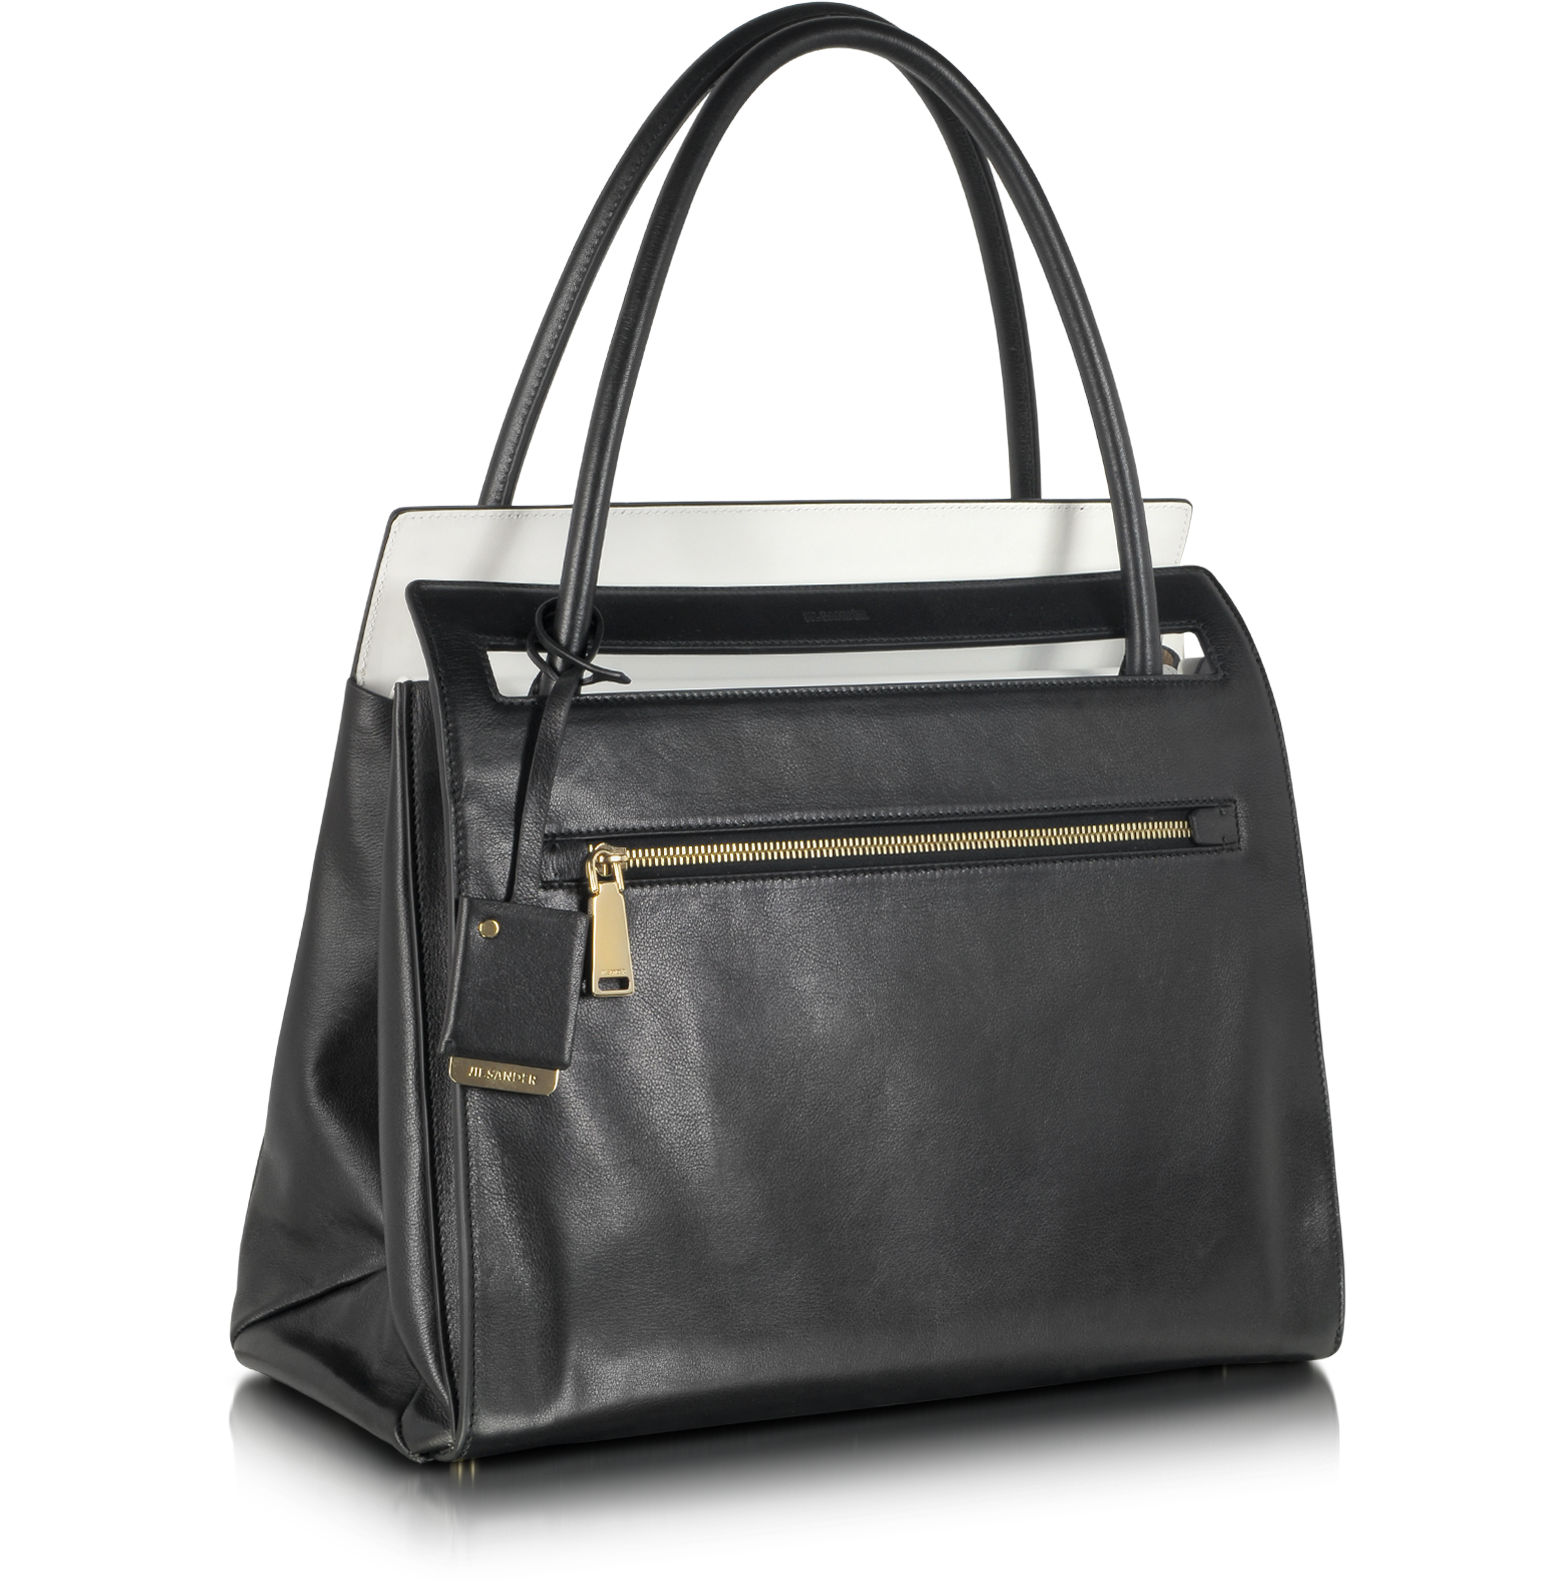 Jil Sander Paterson Black Leather Tote at FORZIERI